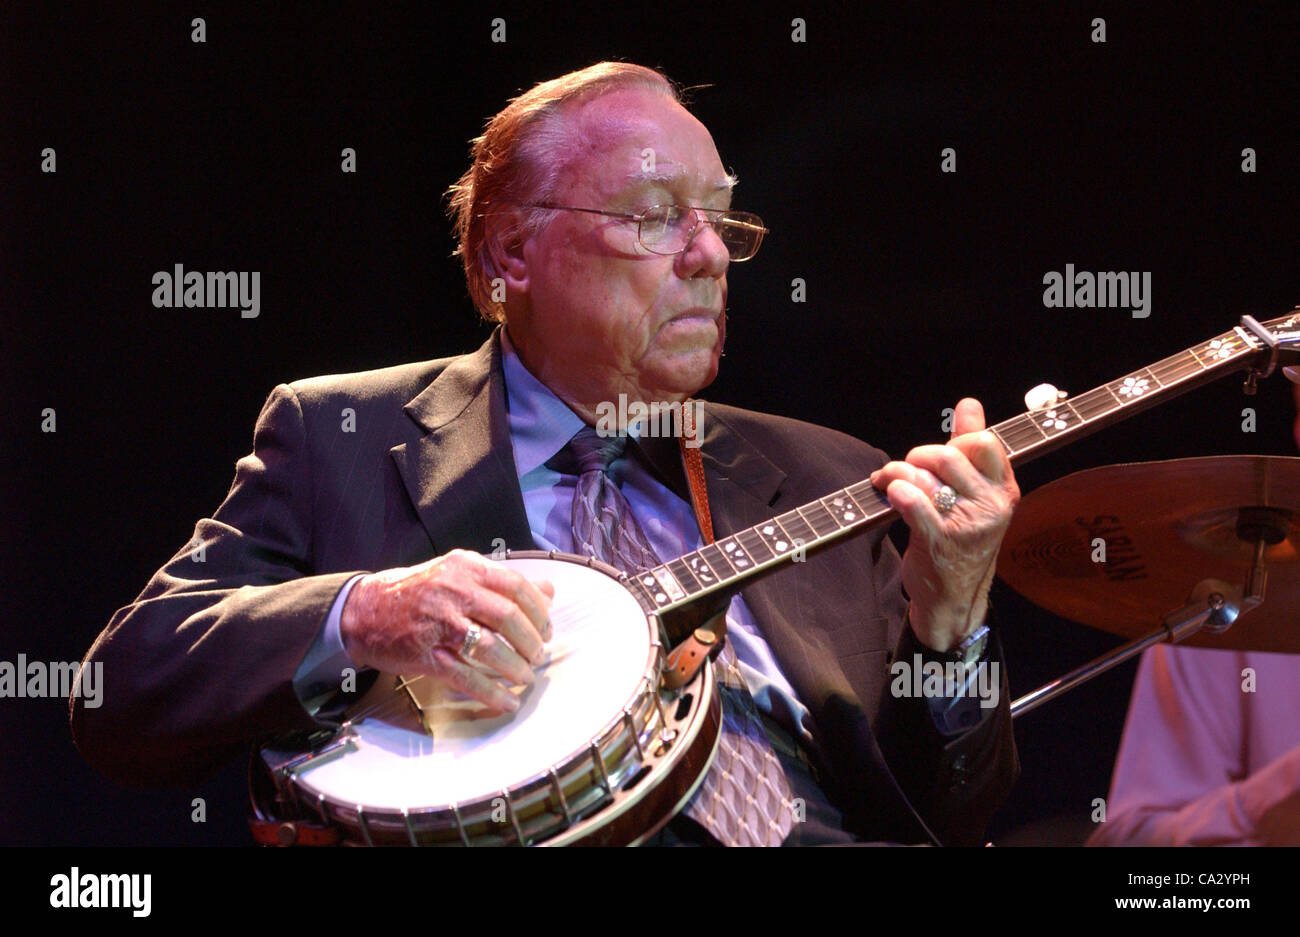 Oct 17, 2006; Raleigh, NC, USA; Legendary Banjoist EARL SCRUGGS performs live as his 2006 tour makes a stop at the Dorton Arena as part of the North Carolina State Fair. Mandatory Credit: Photo by Jason Moore/ZUMA Press. (©) Copyright 2006 by Jason Moore Stock Photo